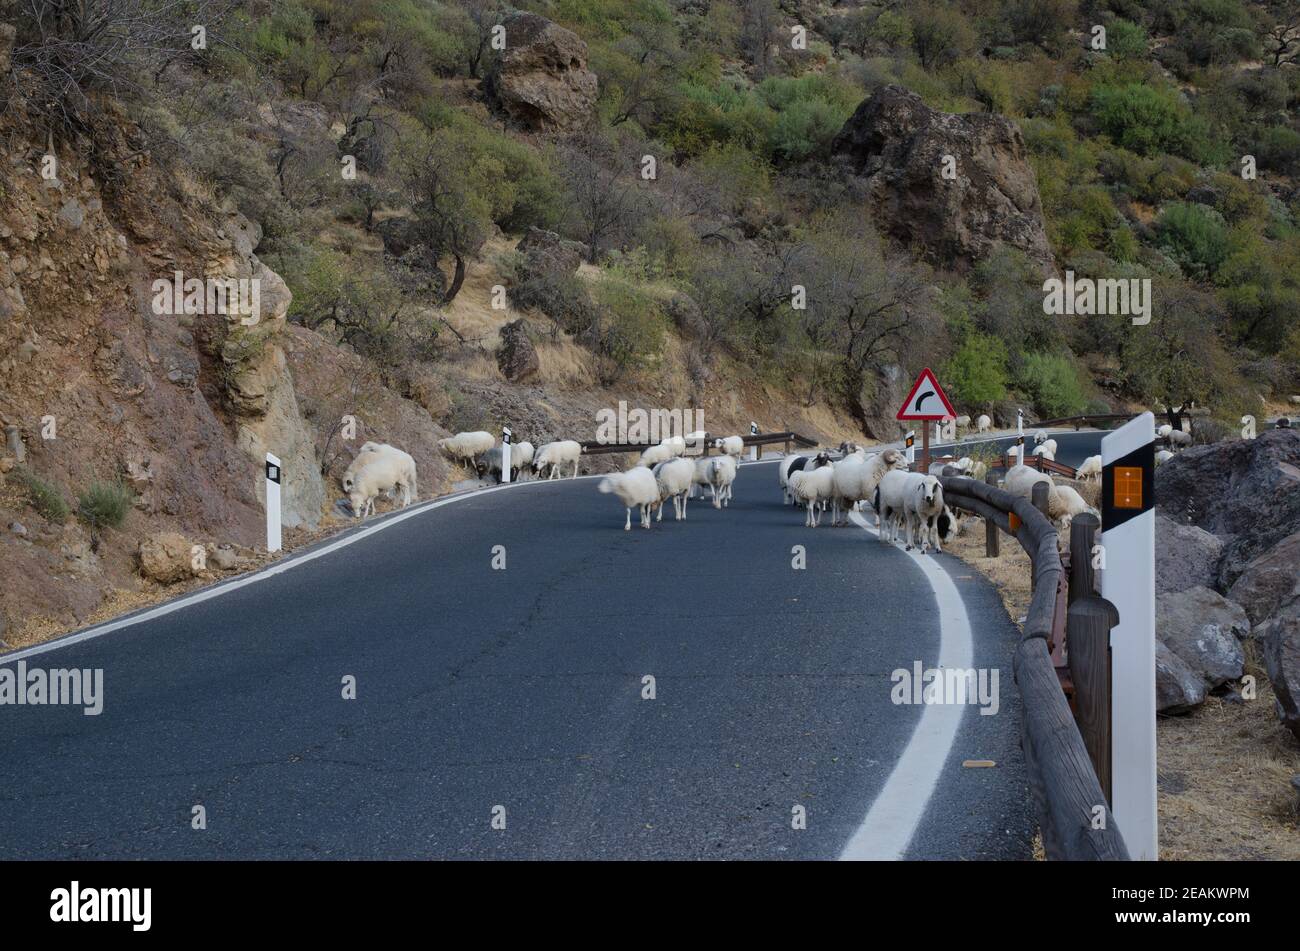 Flock of sheep Ovis aries on the road. Stock Photo